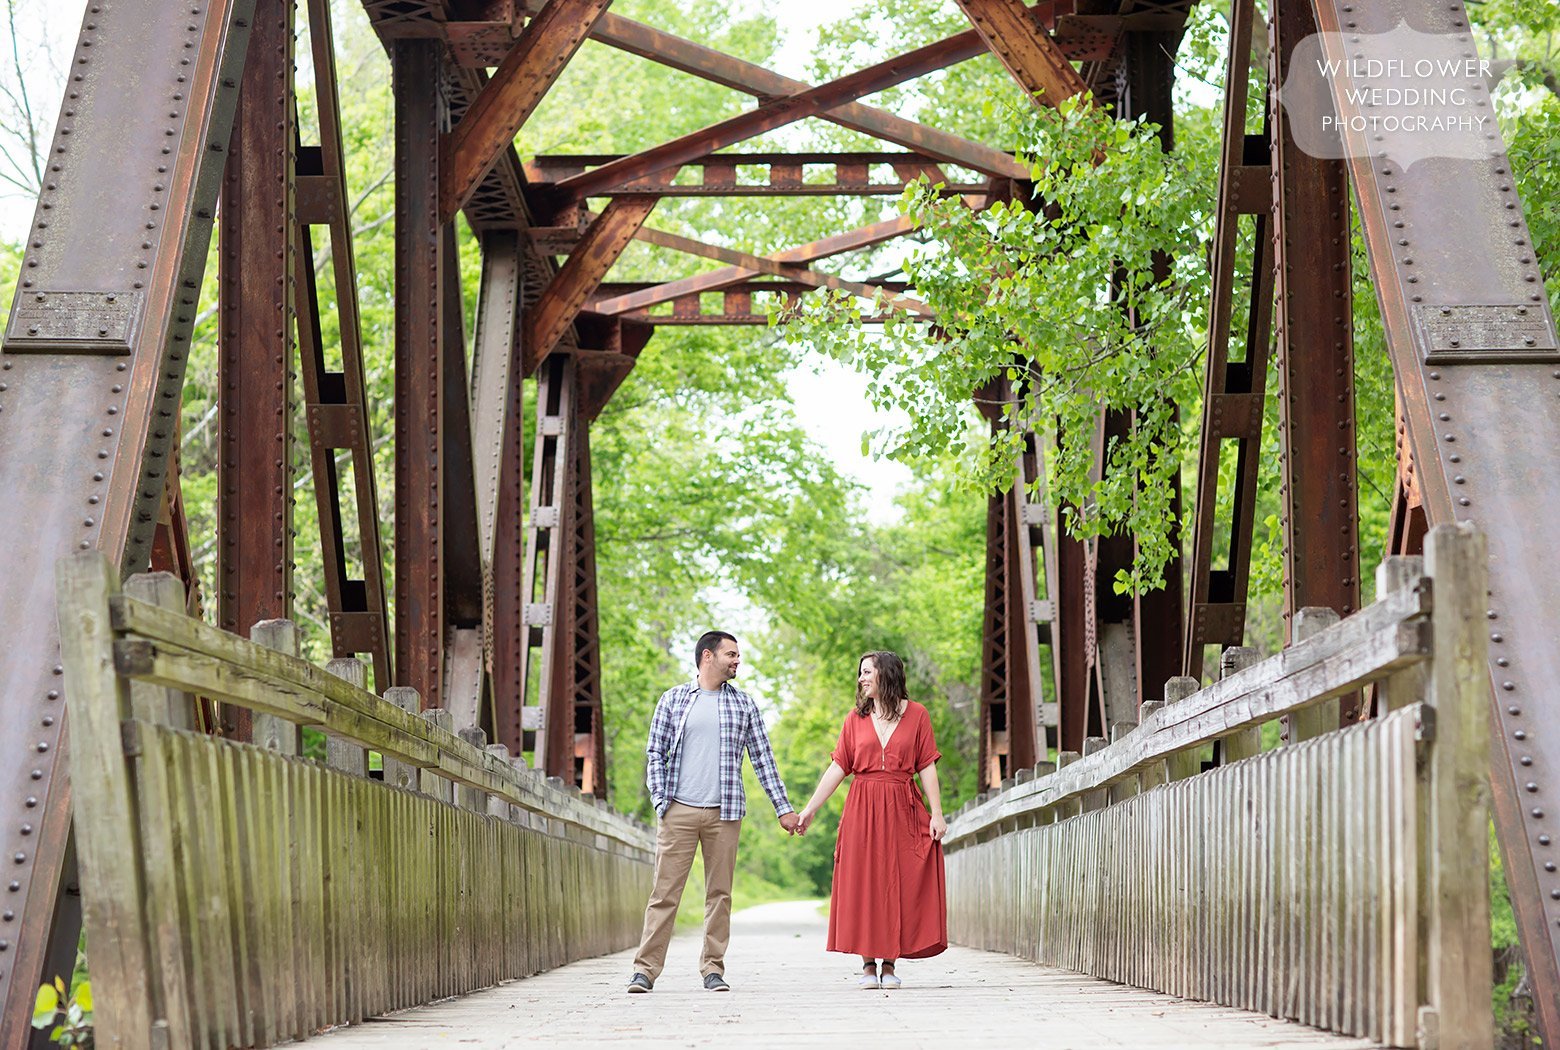 Couple stands on bridge during this Cooper's Landing portrait photography engagement session.